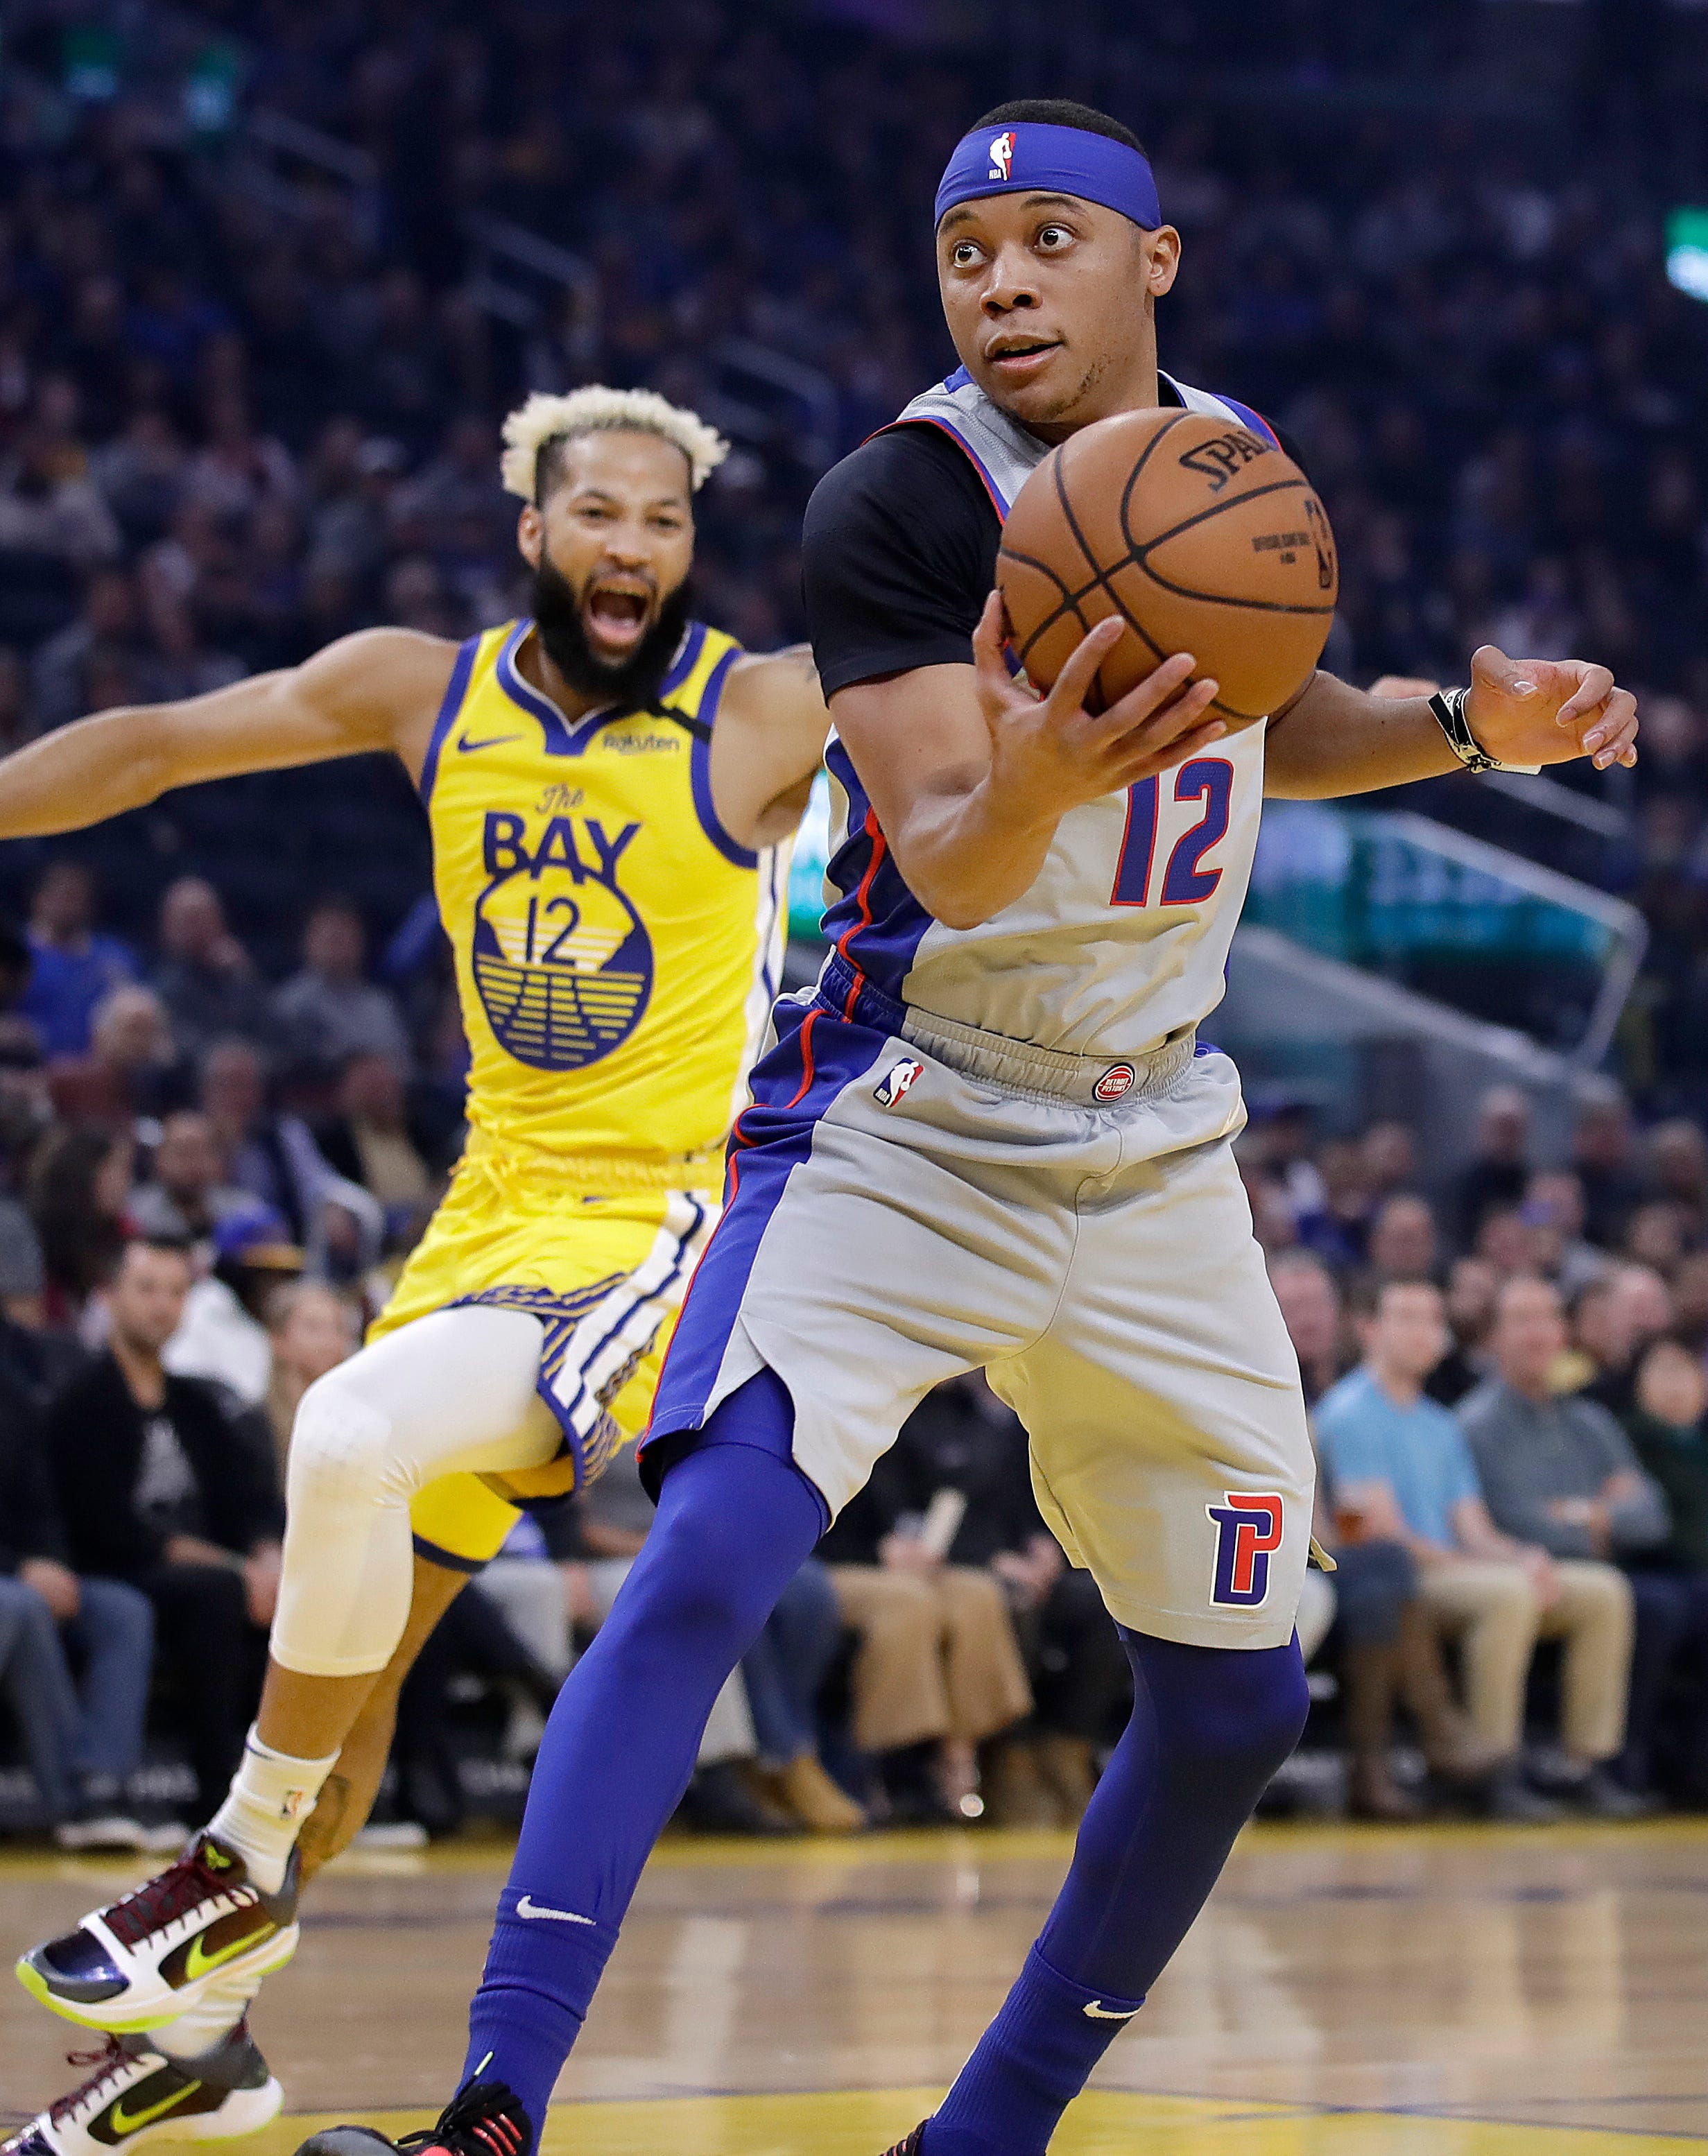 Detroit Pistons' Tim Frazier, right, looks to shoot past Golden State Warriors' Ky Bowman during the first half.